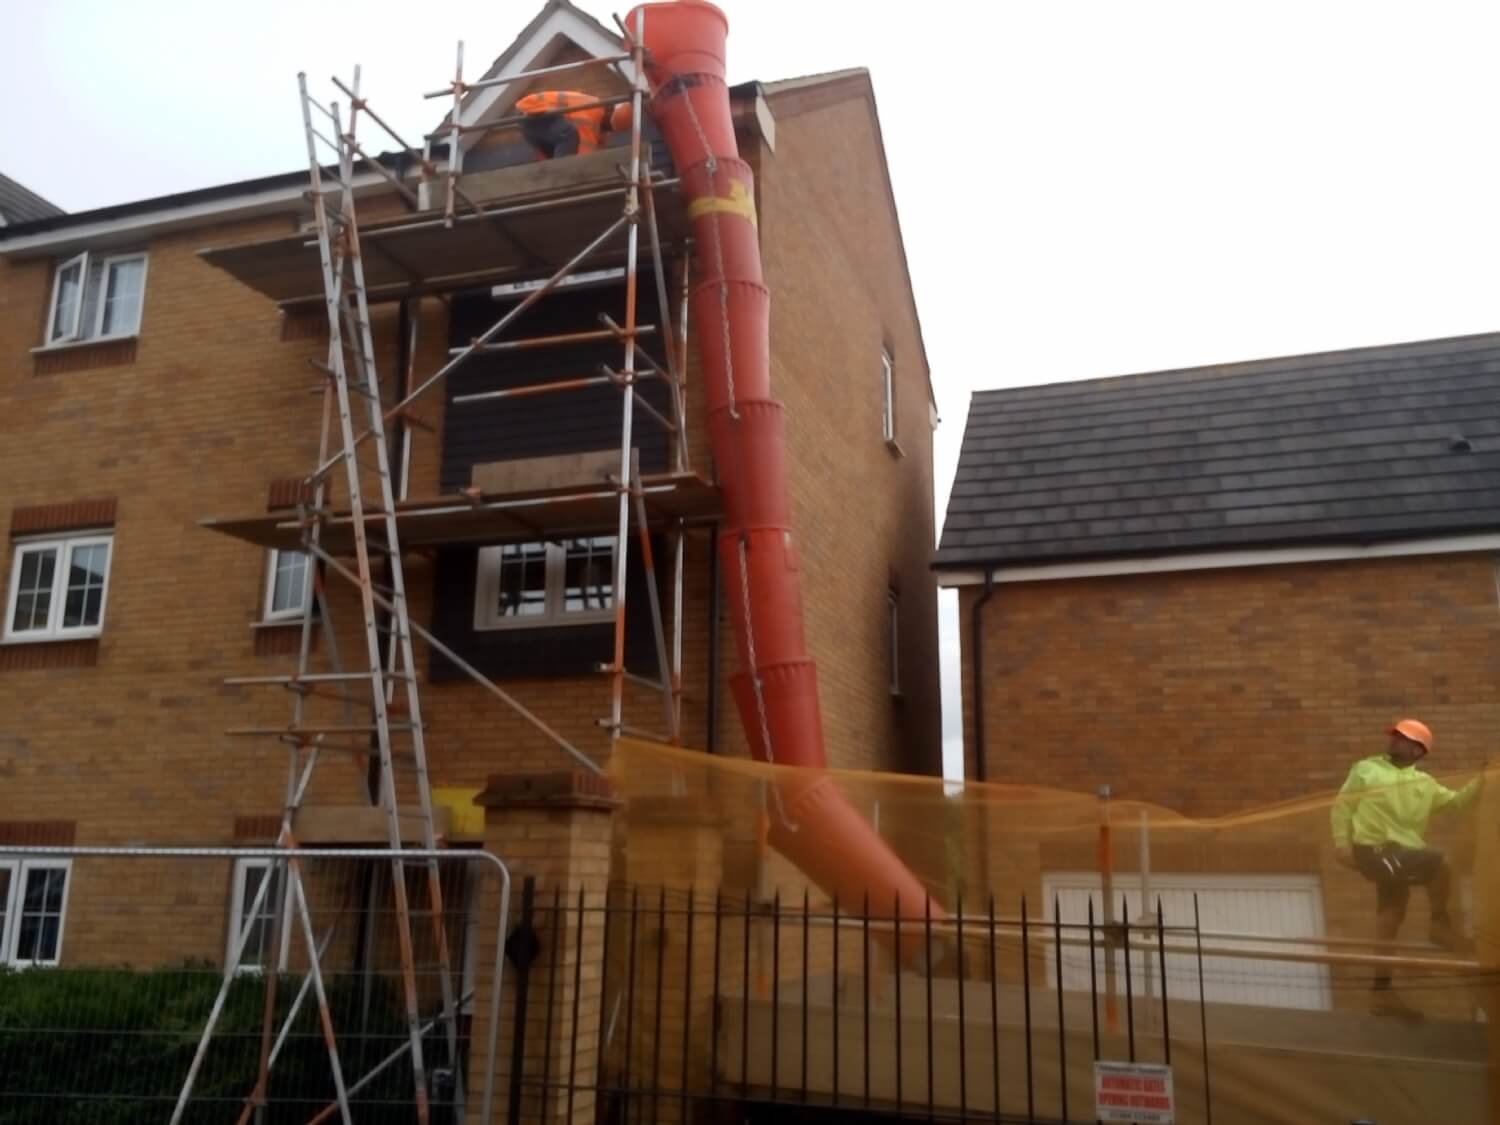 Scaffold Tower and Binshoot Newport Pagnell